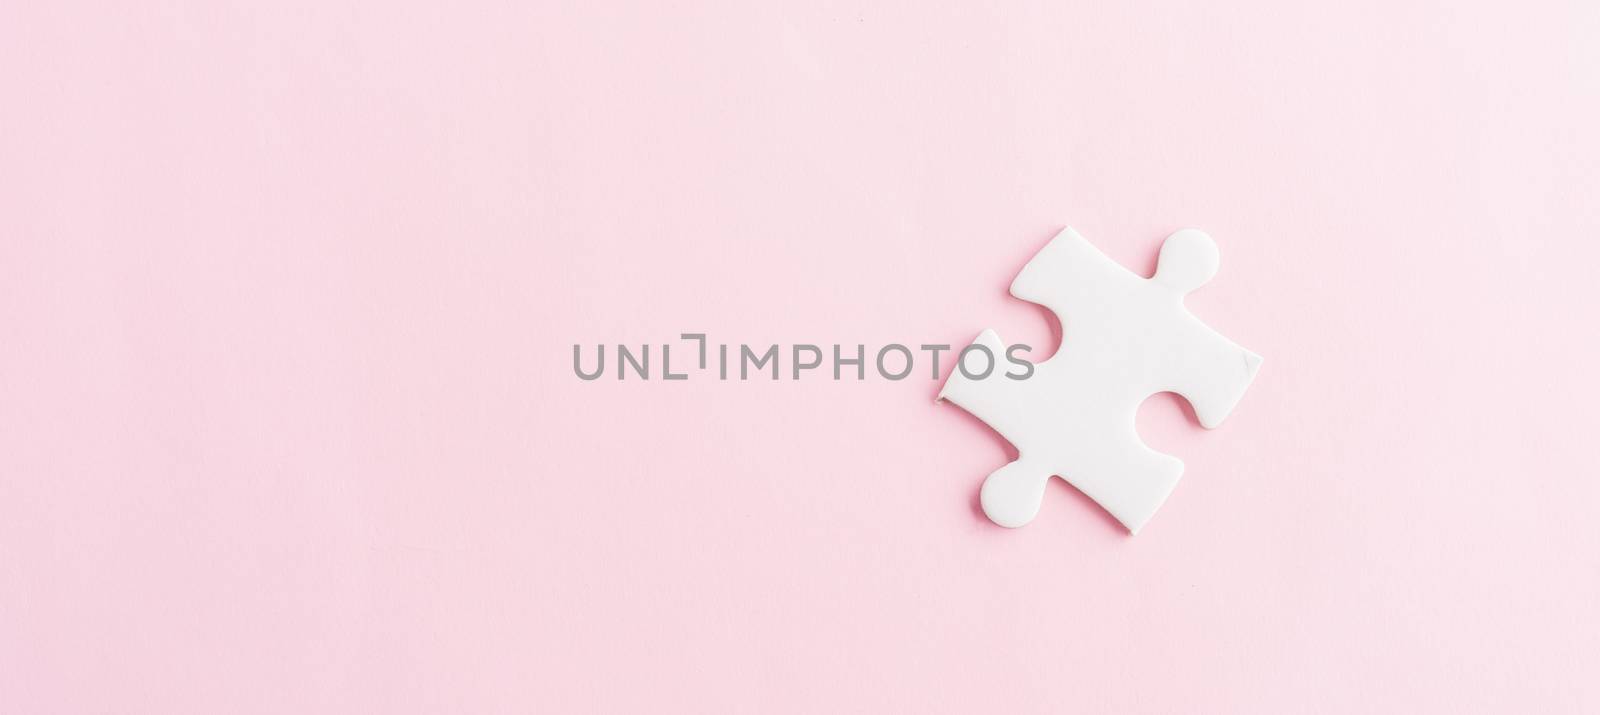 Top view flat lay of one paper plain white jigsaw puzzle game last pieces for solve, studio shot on a pink background, quiz calculation concept